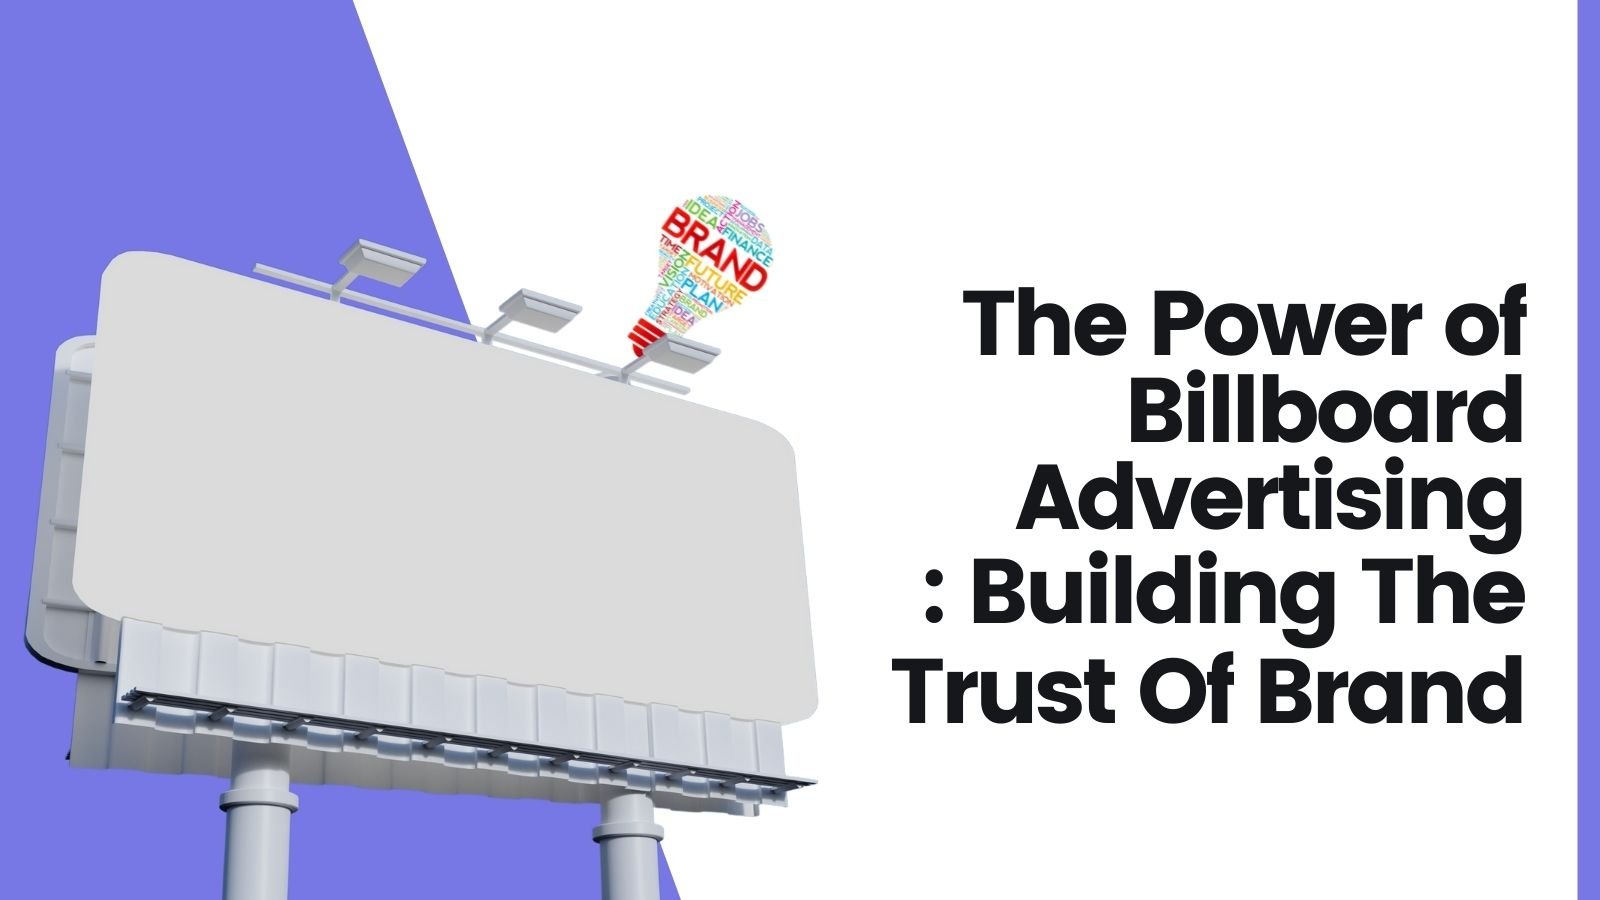 The Power of Billboard Advertising
: Building The Trust Of Brand